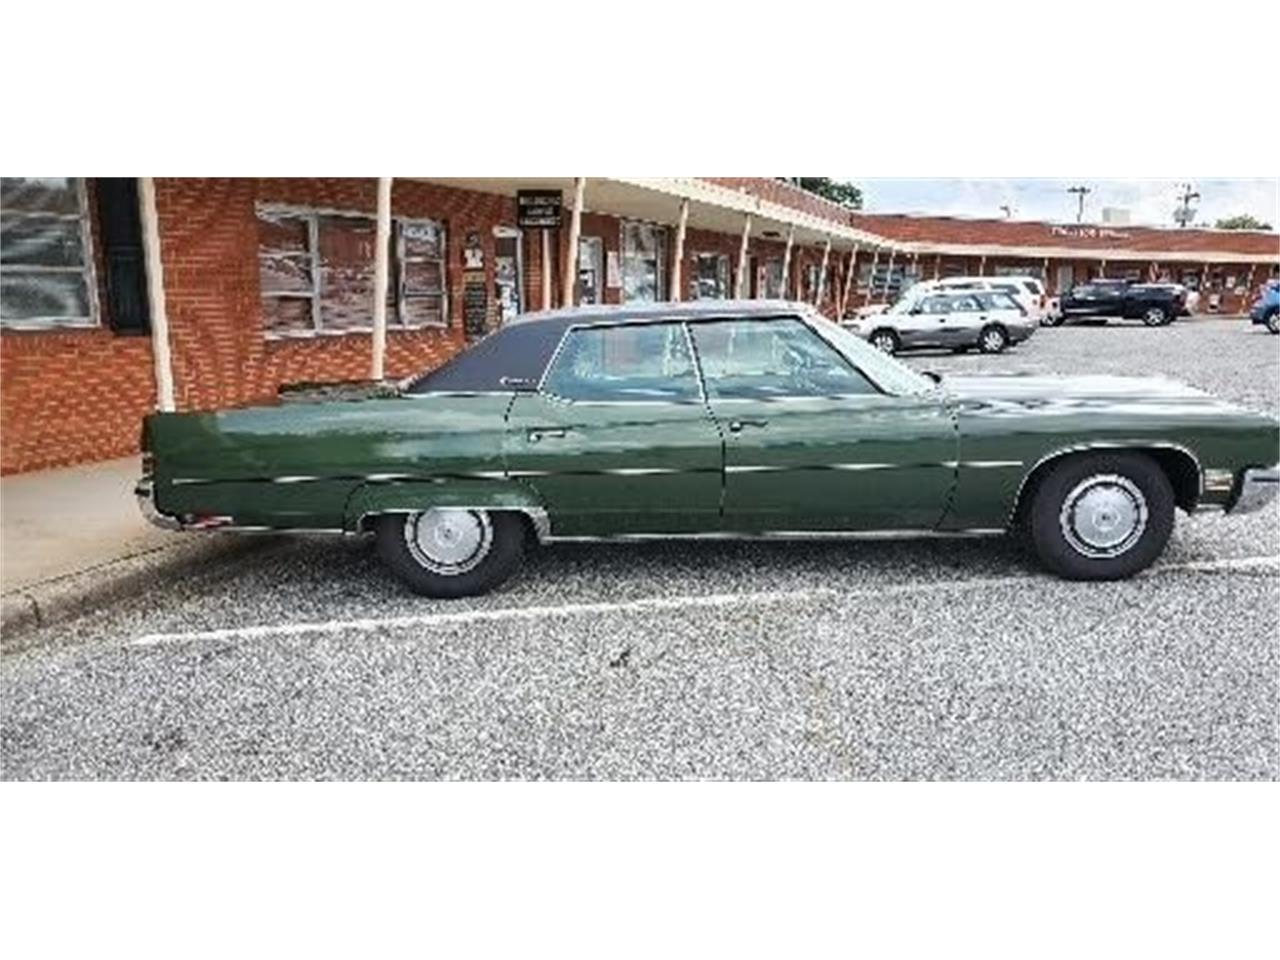 For Sale at Auction: 1972 Buick Electra in Greensboro, North Carolina for sale in Greensboro, NC